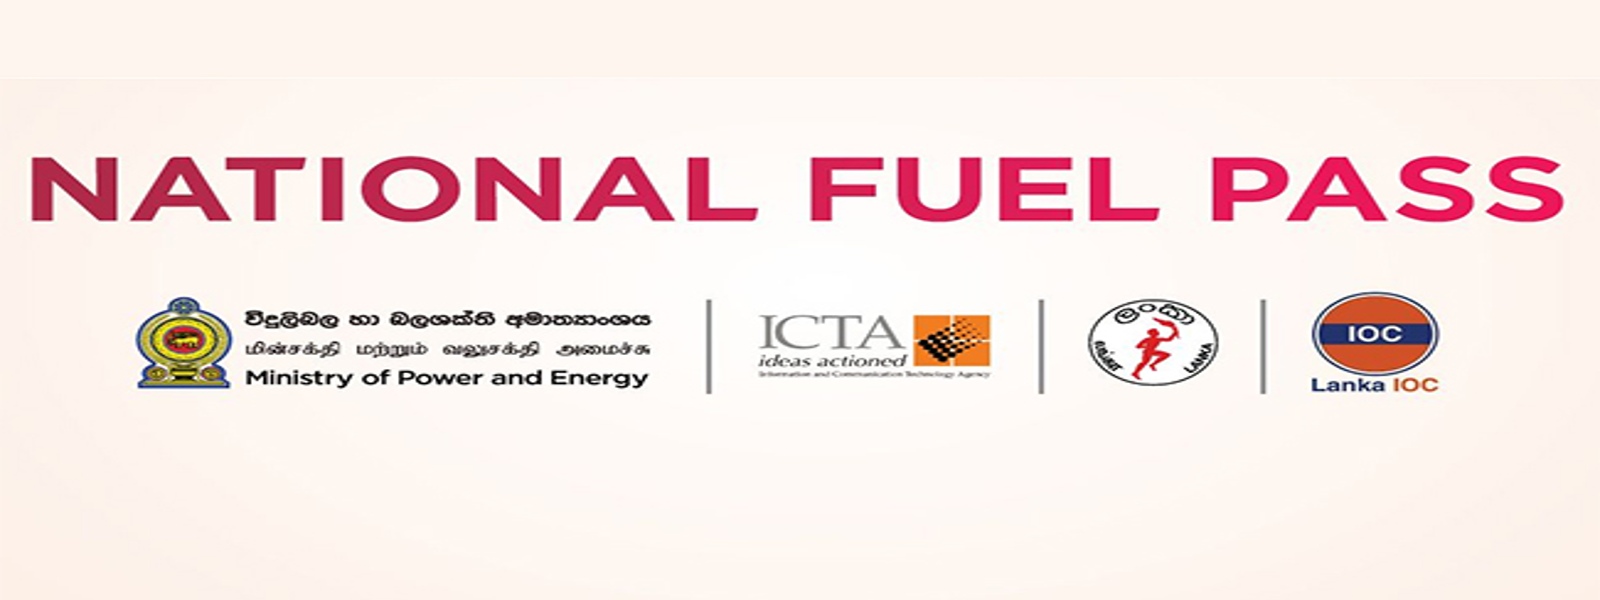 Update on National Fuel Pass